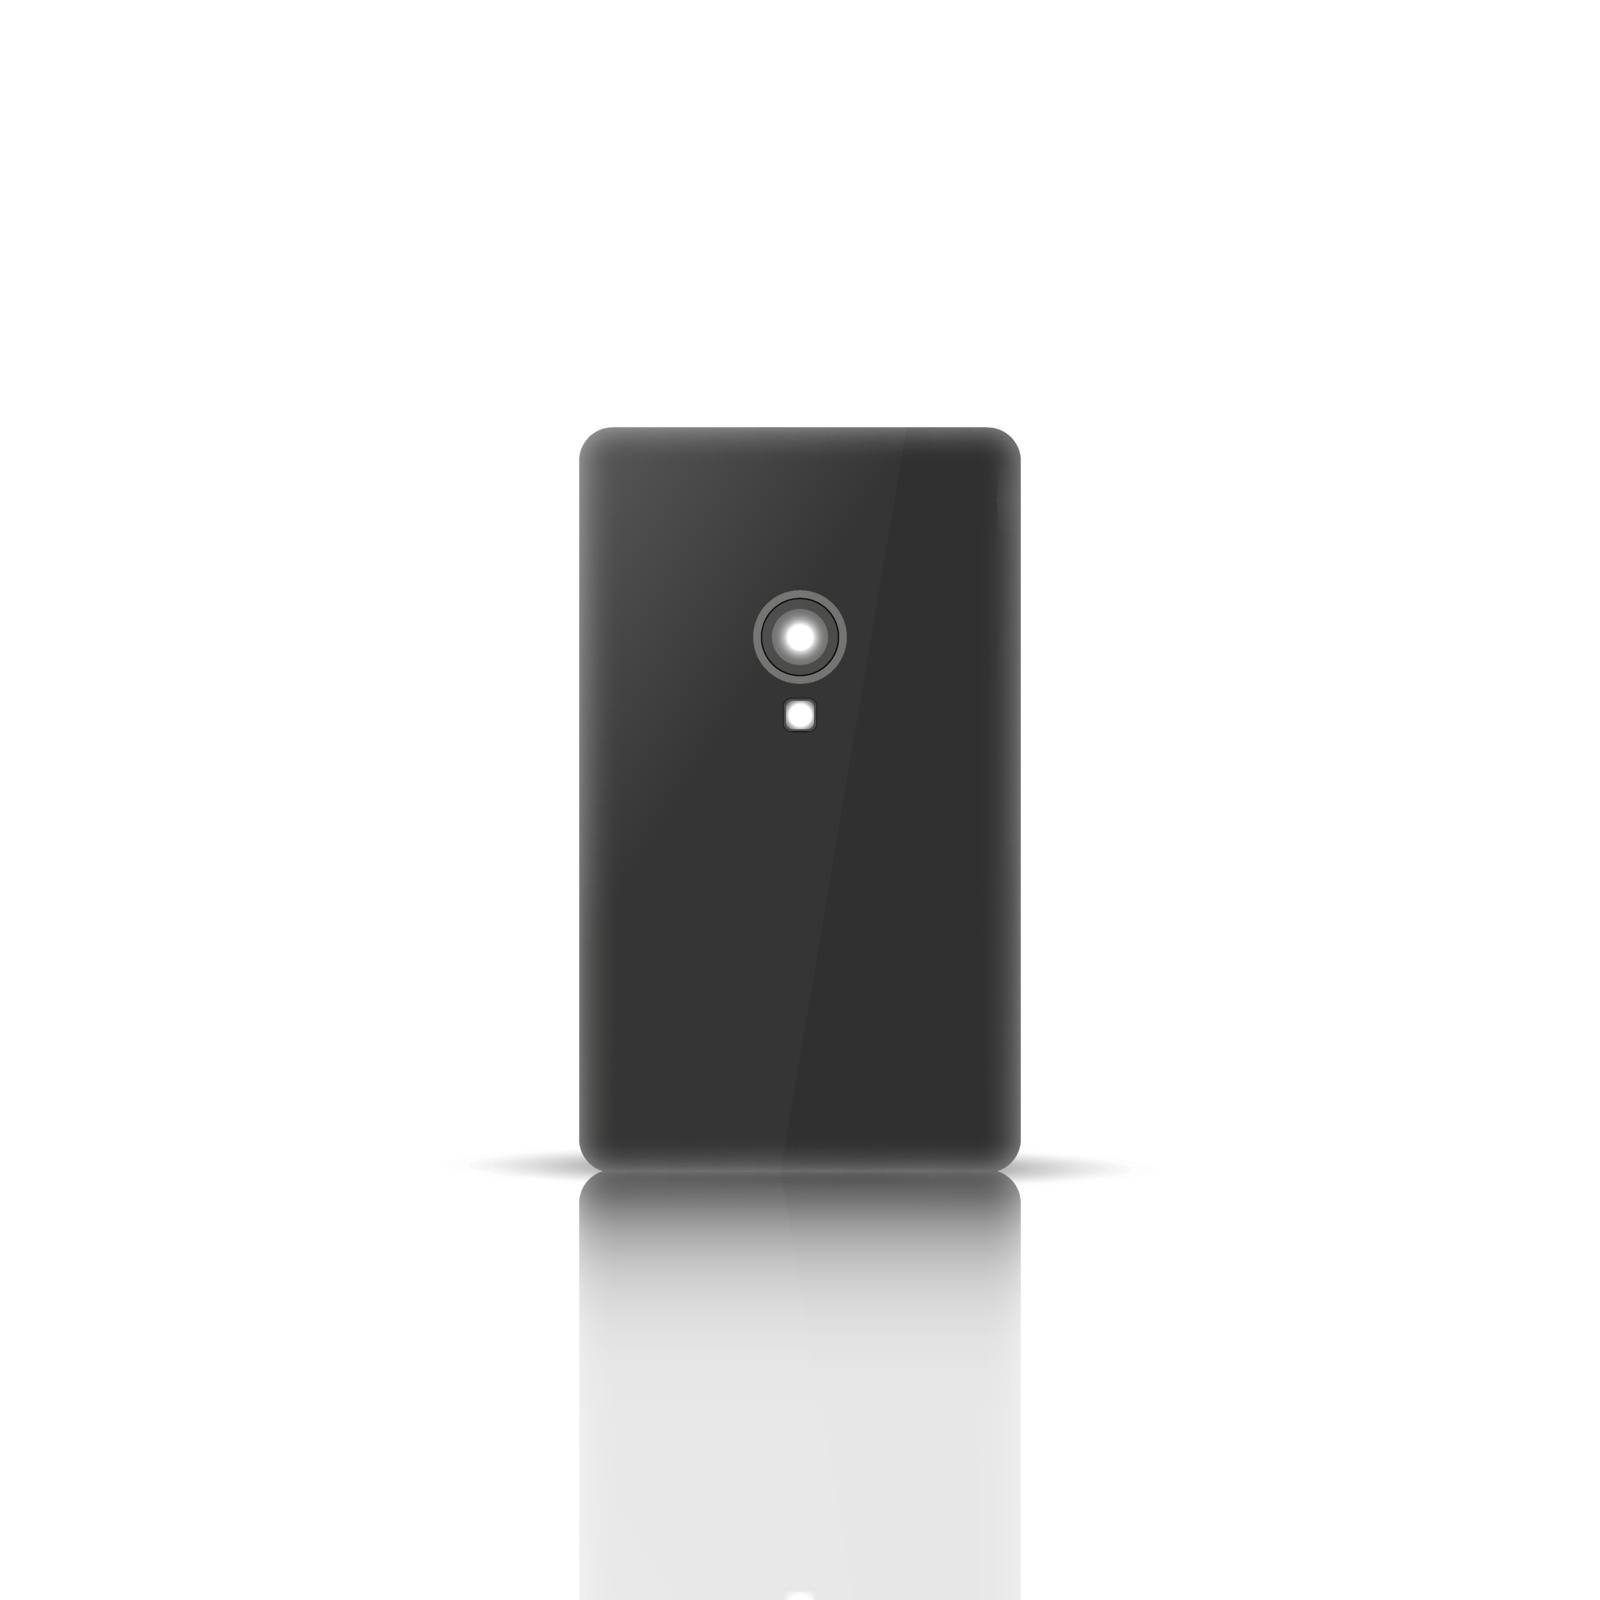 Photorealistic mobile phone with a mirror reflection, isolated on white background. Back side. Element for design of digital devices, vector illustration.